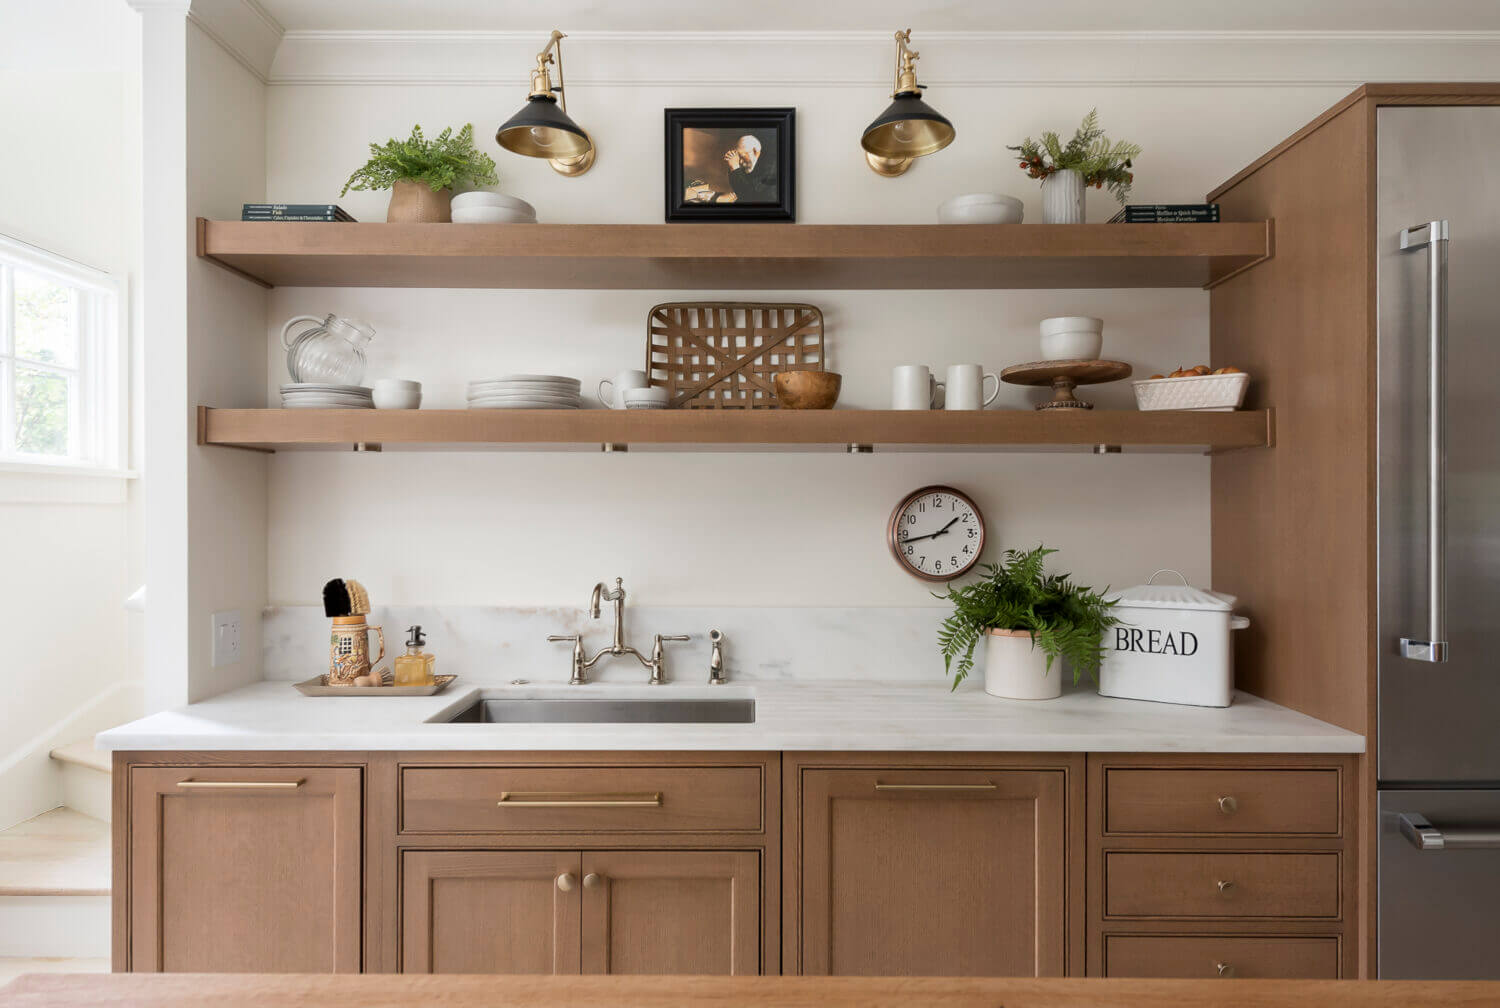 A wall with light oak base cabinets and sleek, simple floating shelves instead of wall cabinets.